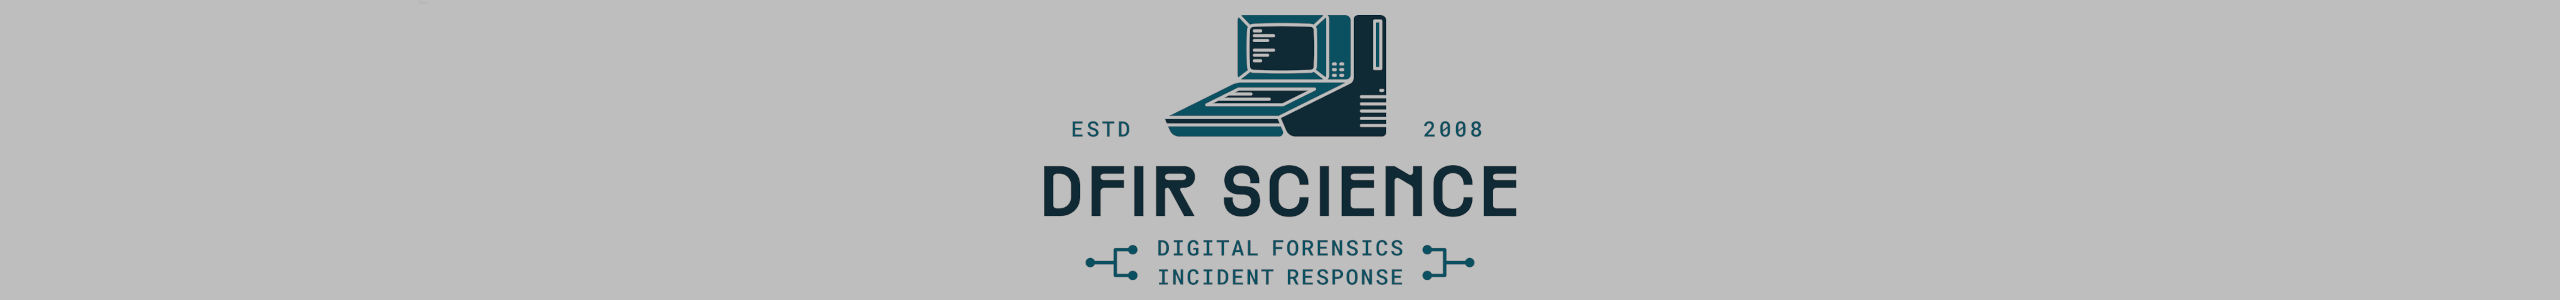 A new look for DFIR Science